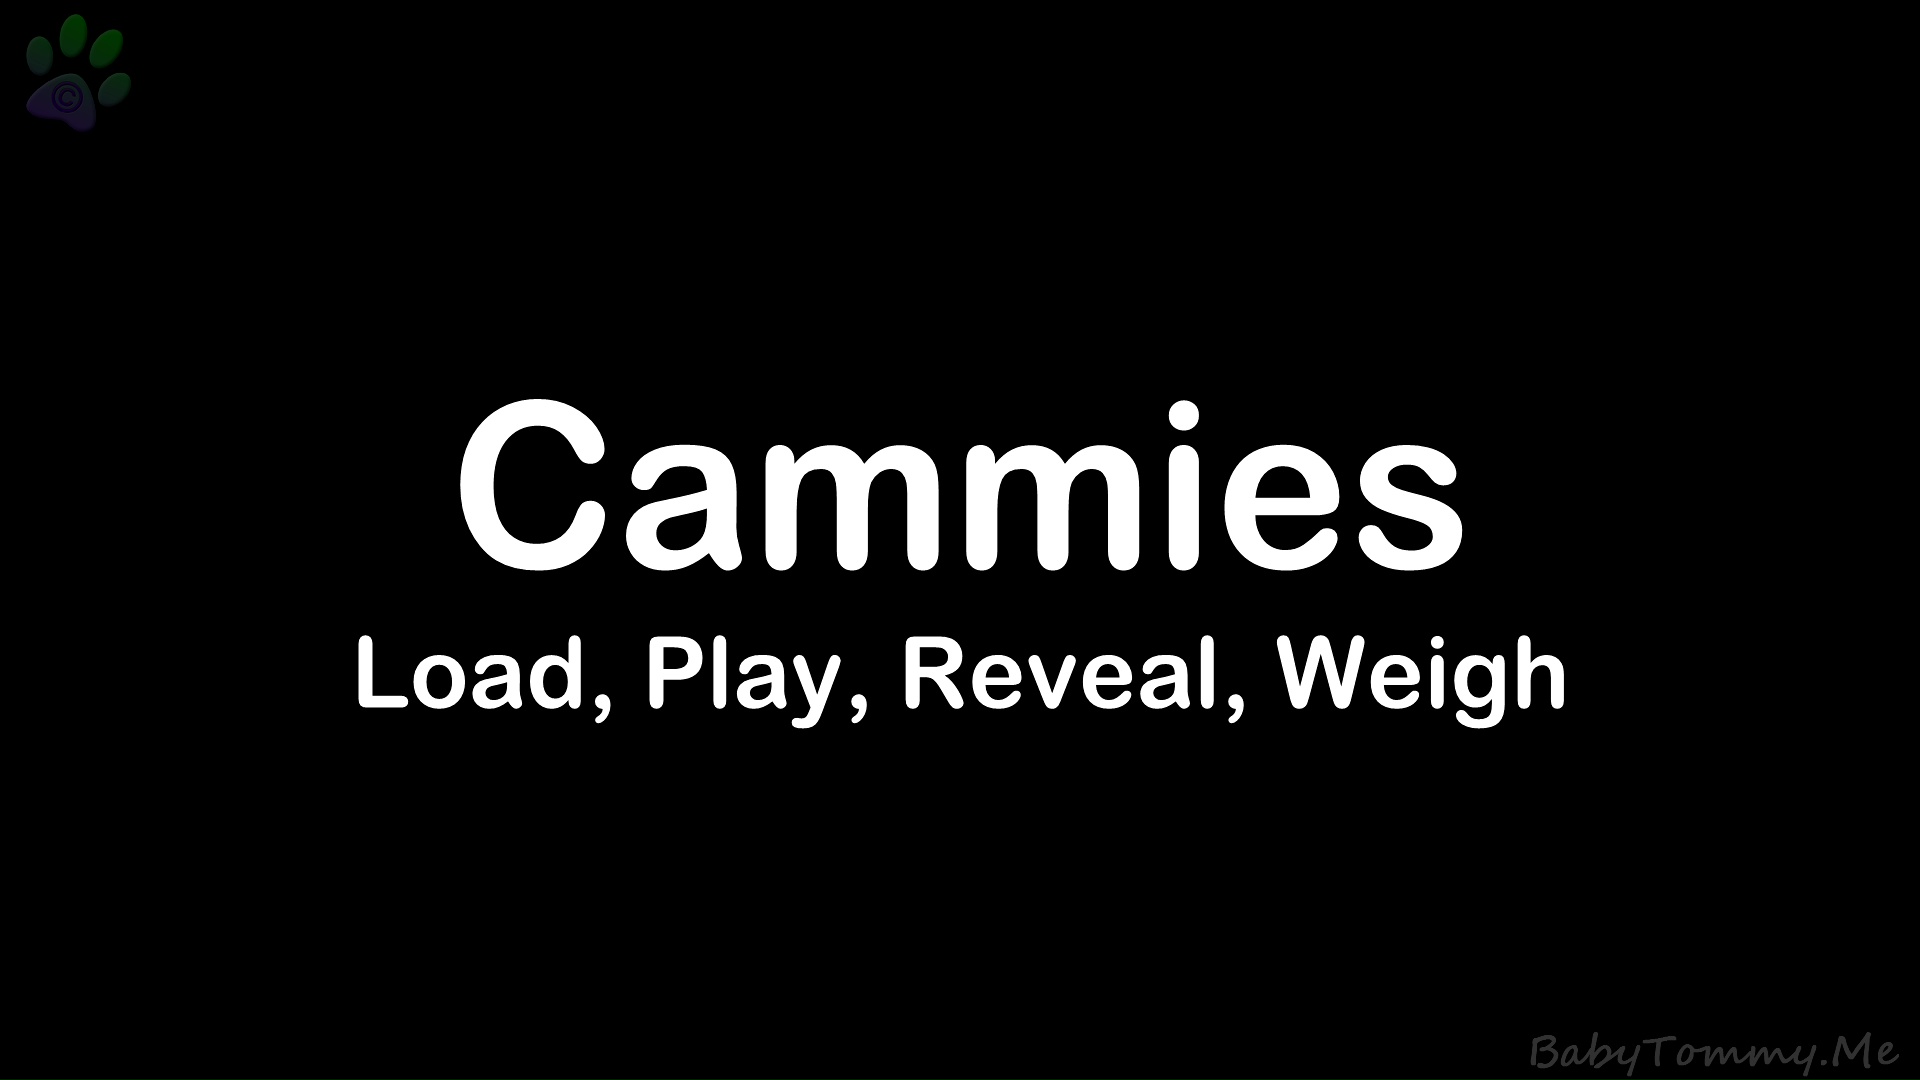 Cammies - Load, Play, Reveal, Weigh